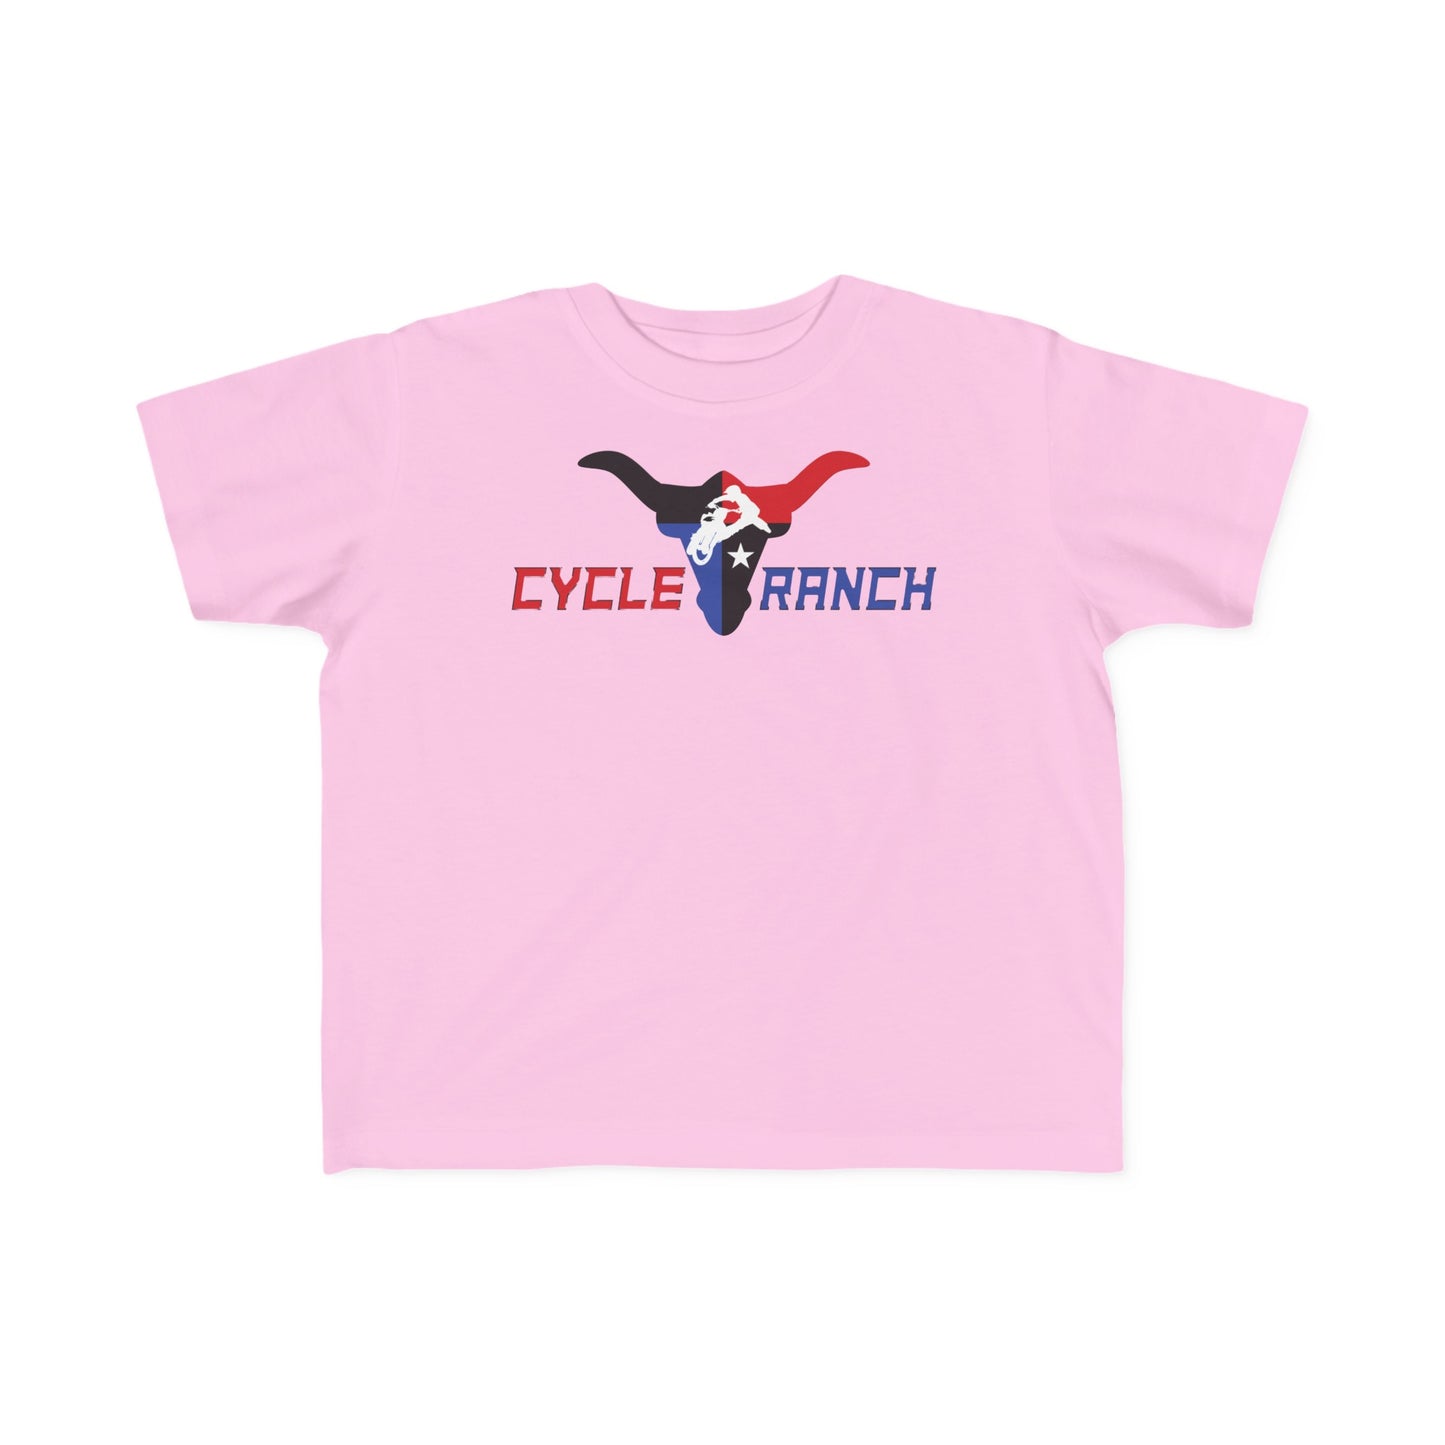 TODDLERS TEE WITH LARGE CYCLE RANCH LOGO